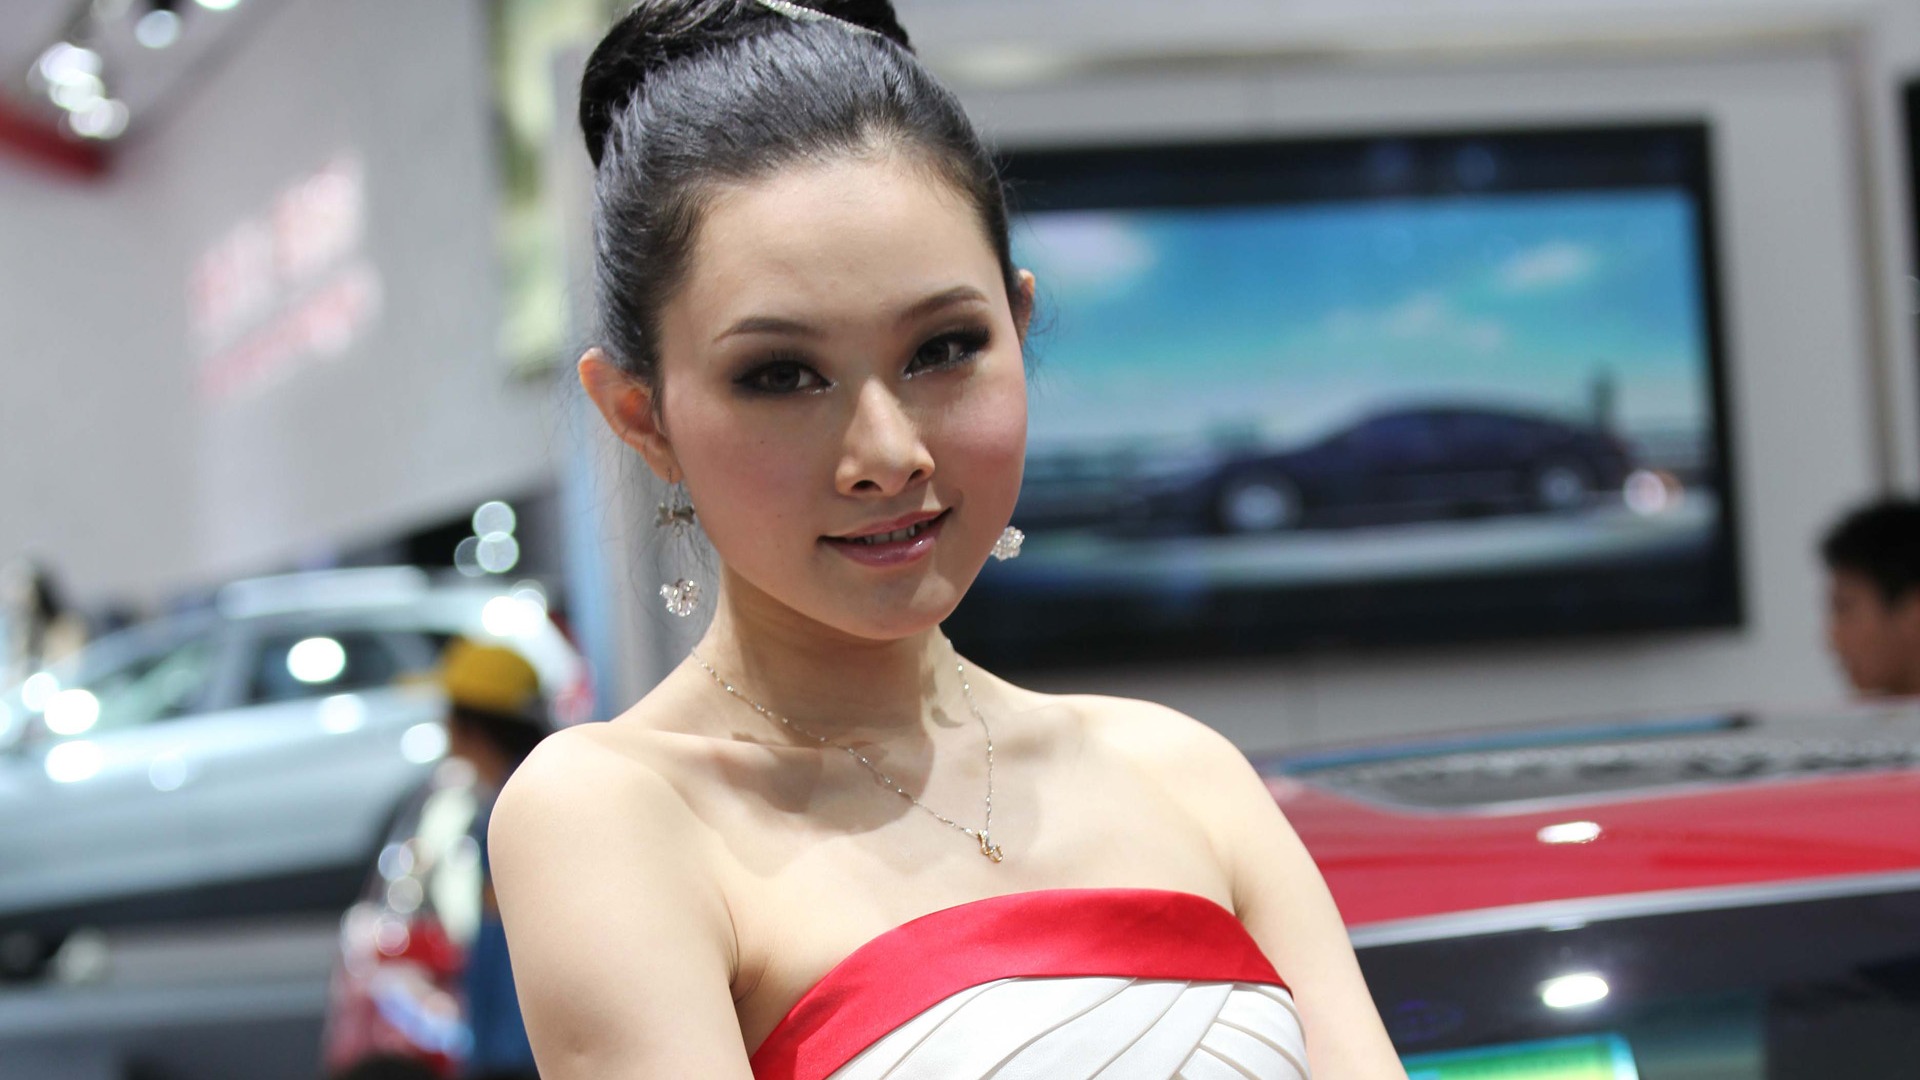 2010 Beijing International Auto Show beauty (1) (the wind chasing the clouds works) #40 - 1920x1080